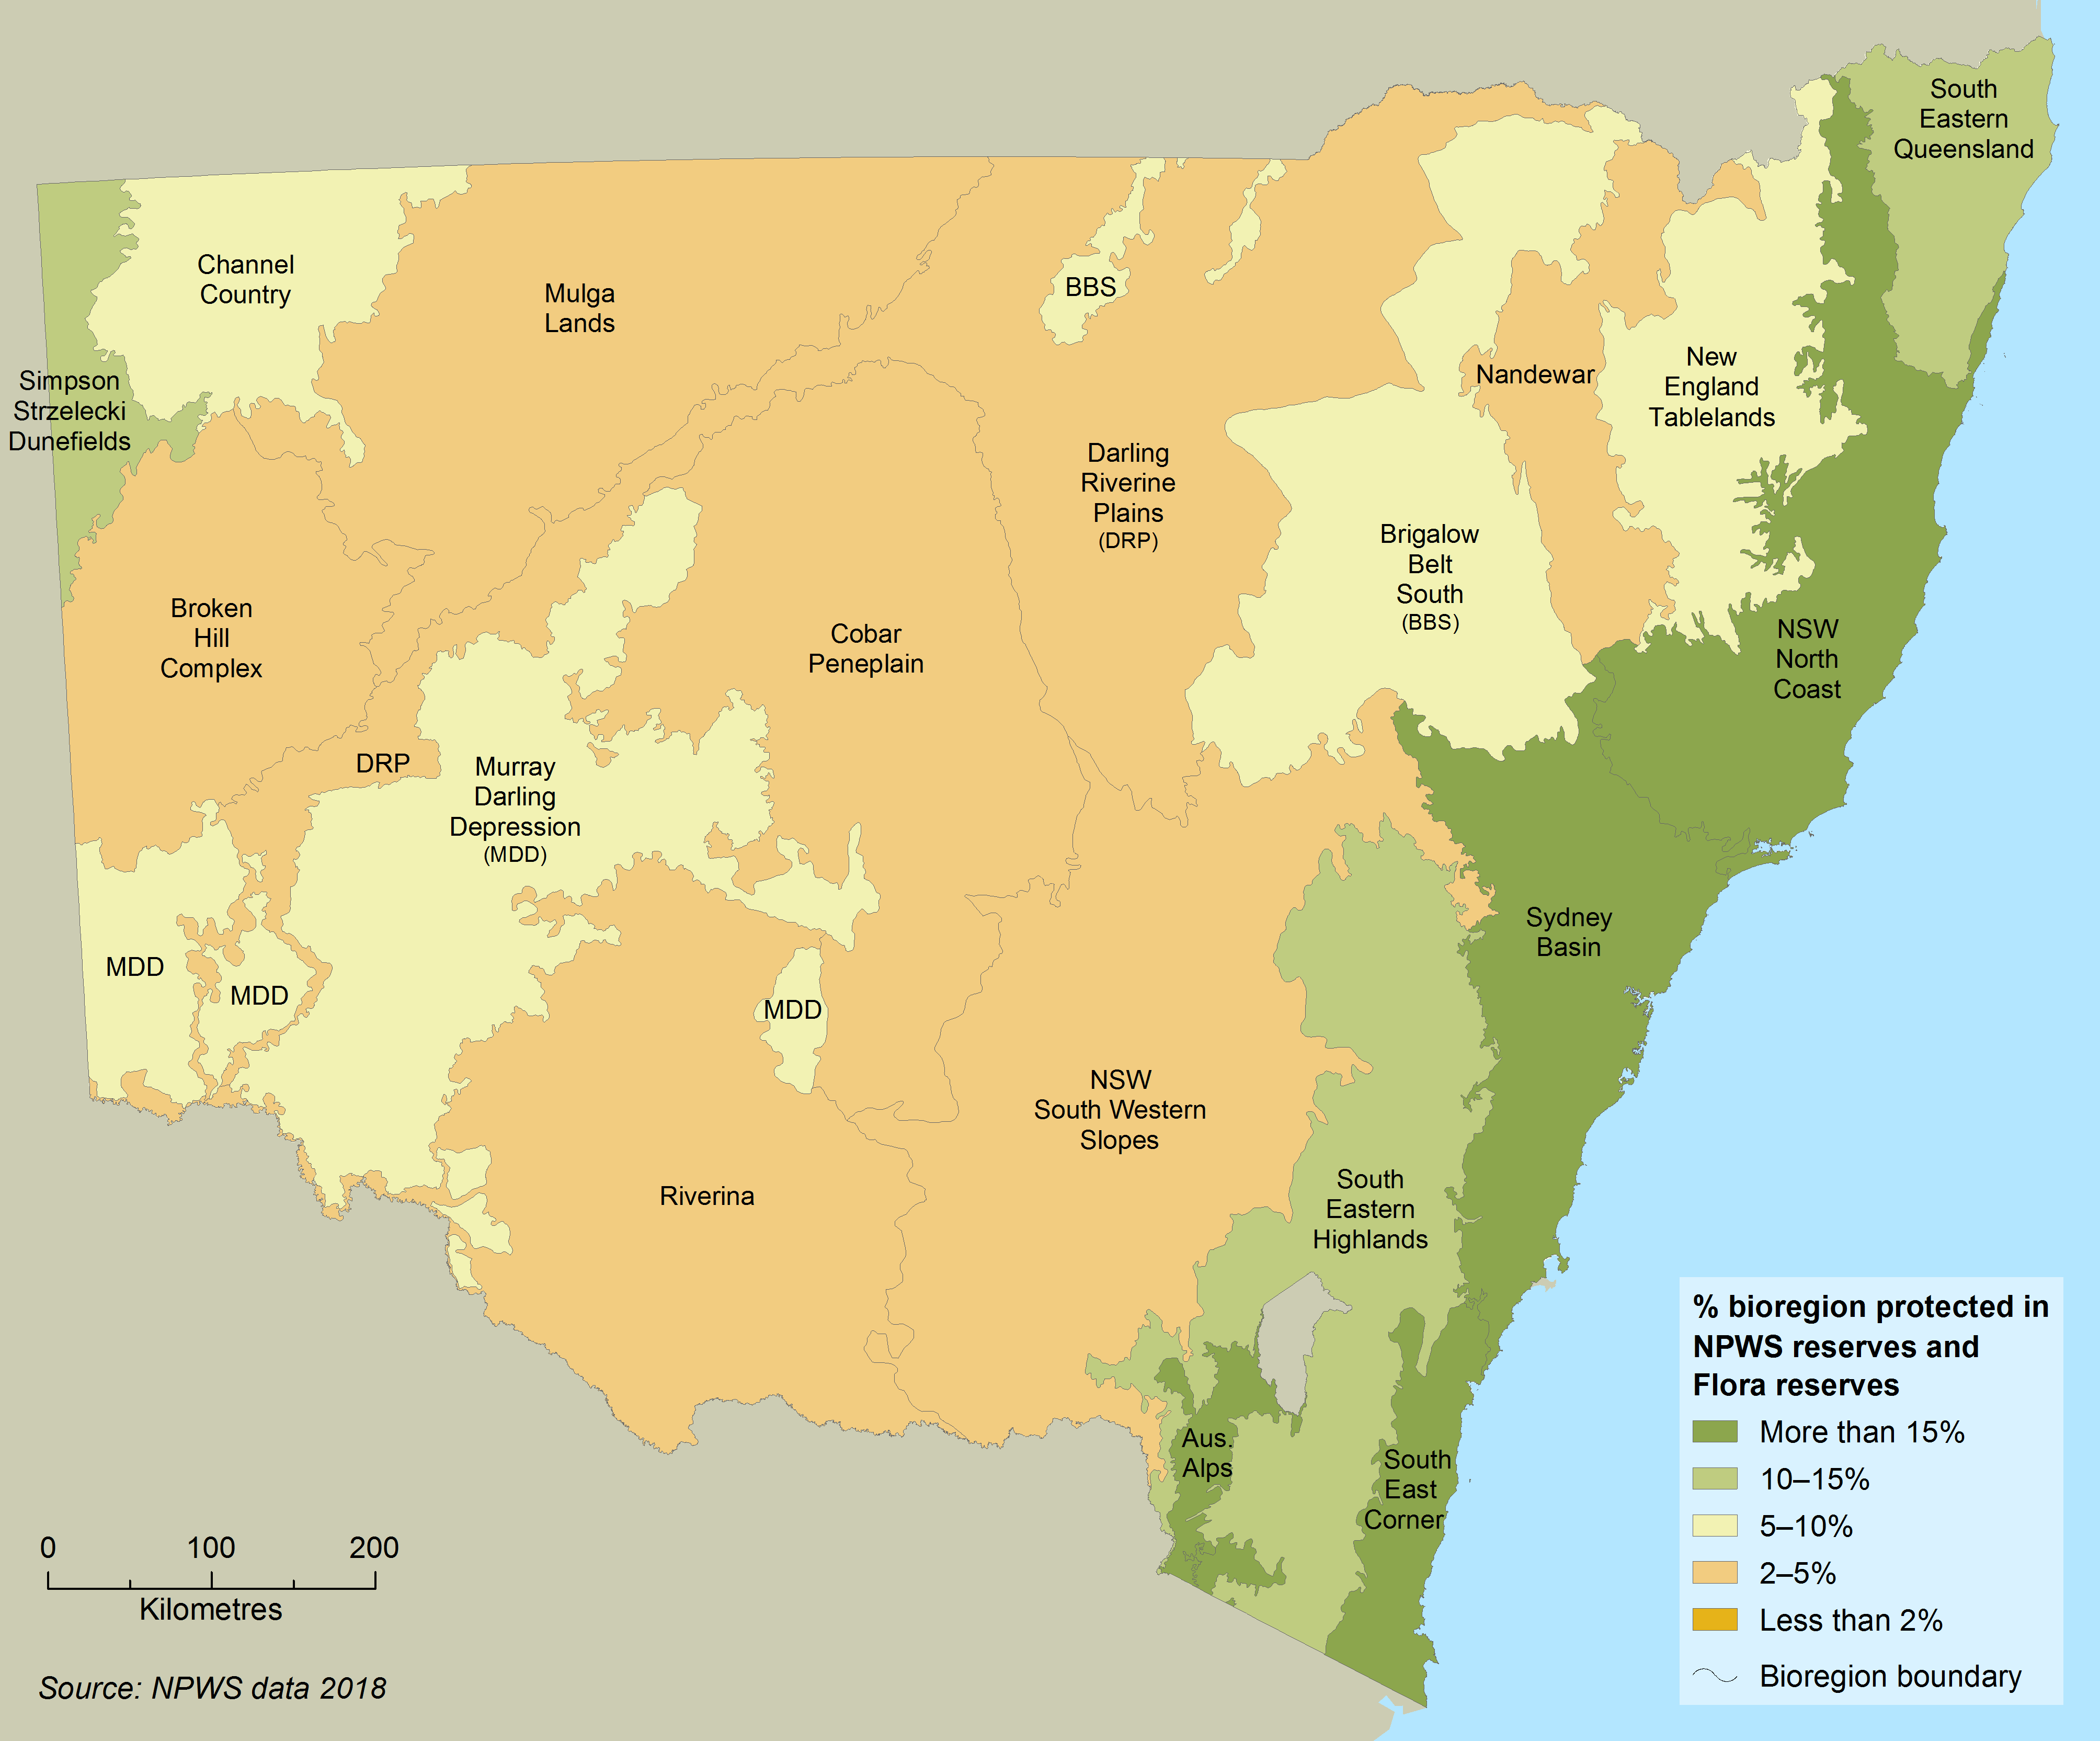 Map showing the density of bioregions protected in NSW Parks and Wildlife Services reserves and Flora reserves. The eastern coastline of NSW has the highest % (at over 10%) while central and inland NSW has a lower % with most sitting between 2-5% and some areas (including the Murray Darling Depression, Brigalow Belt South and the New England Tablelands) having between 5 to 10% protected. 